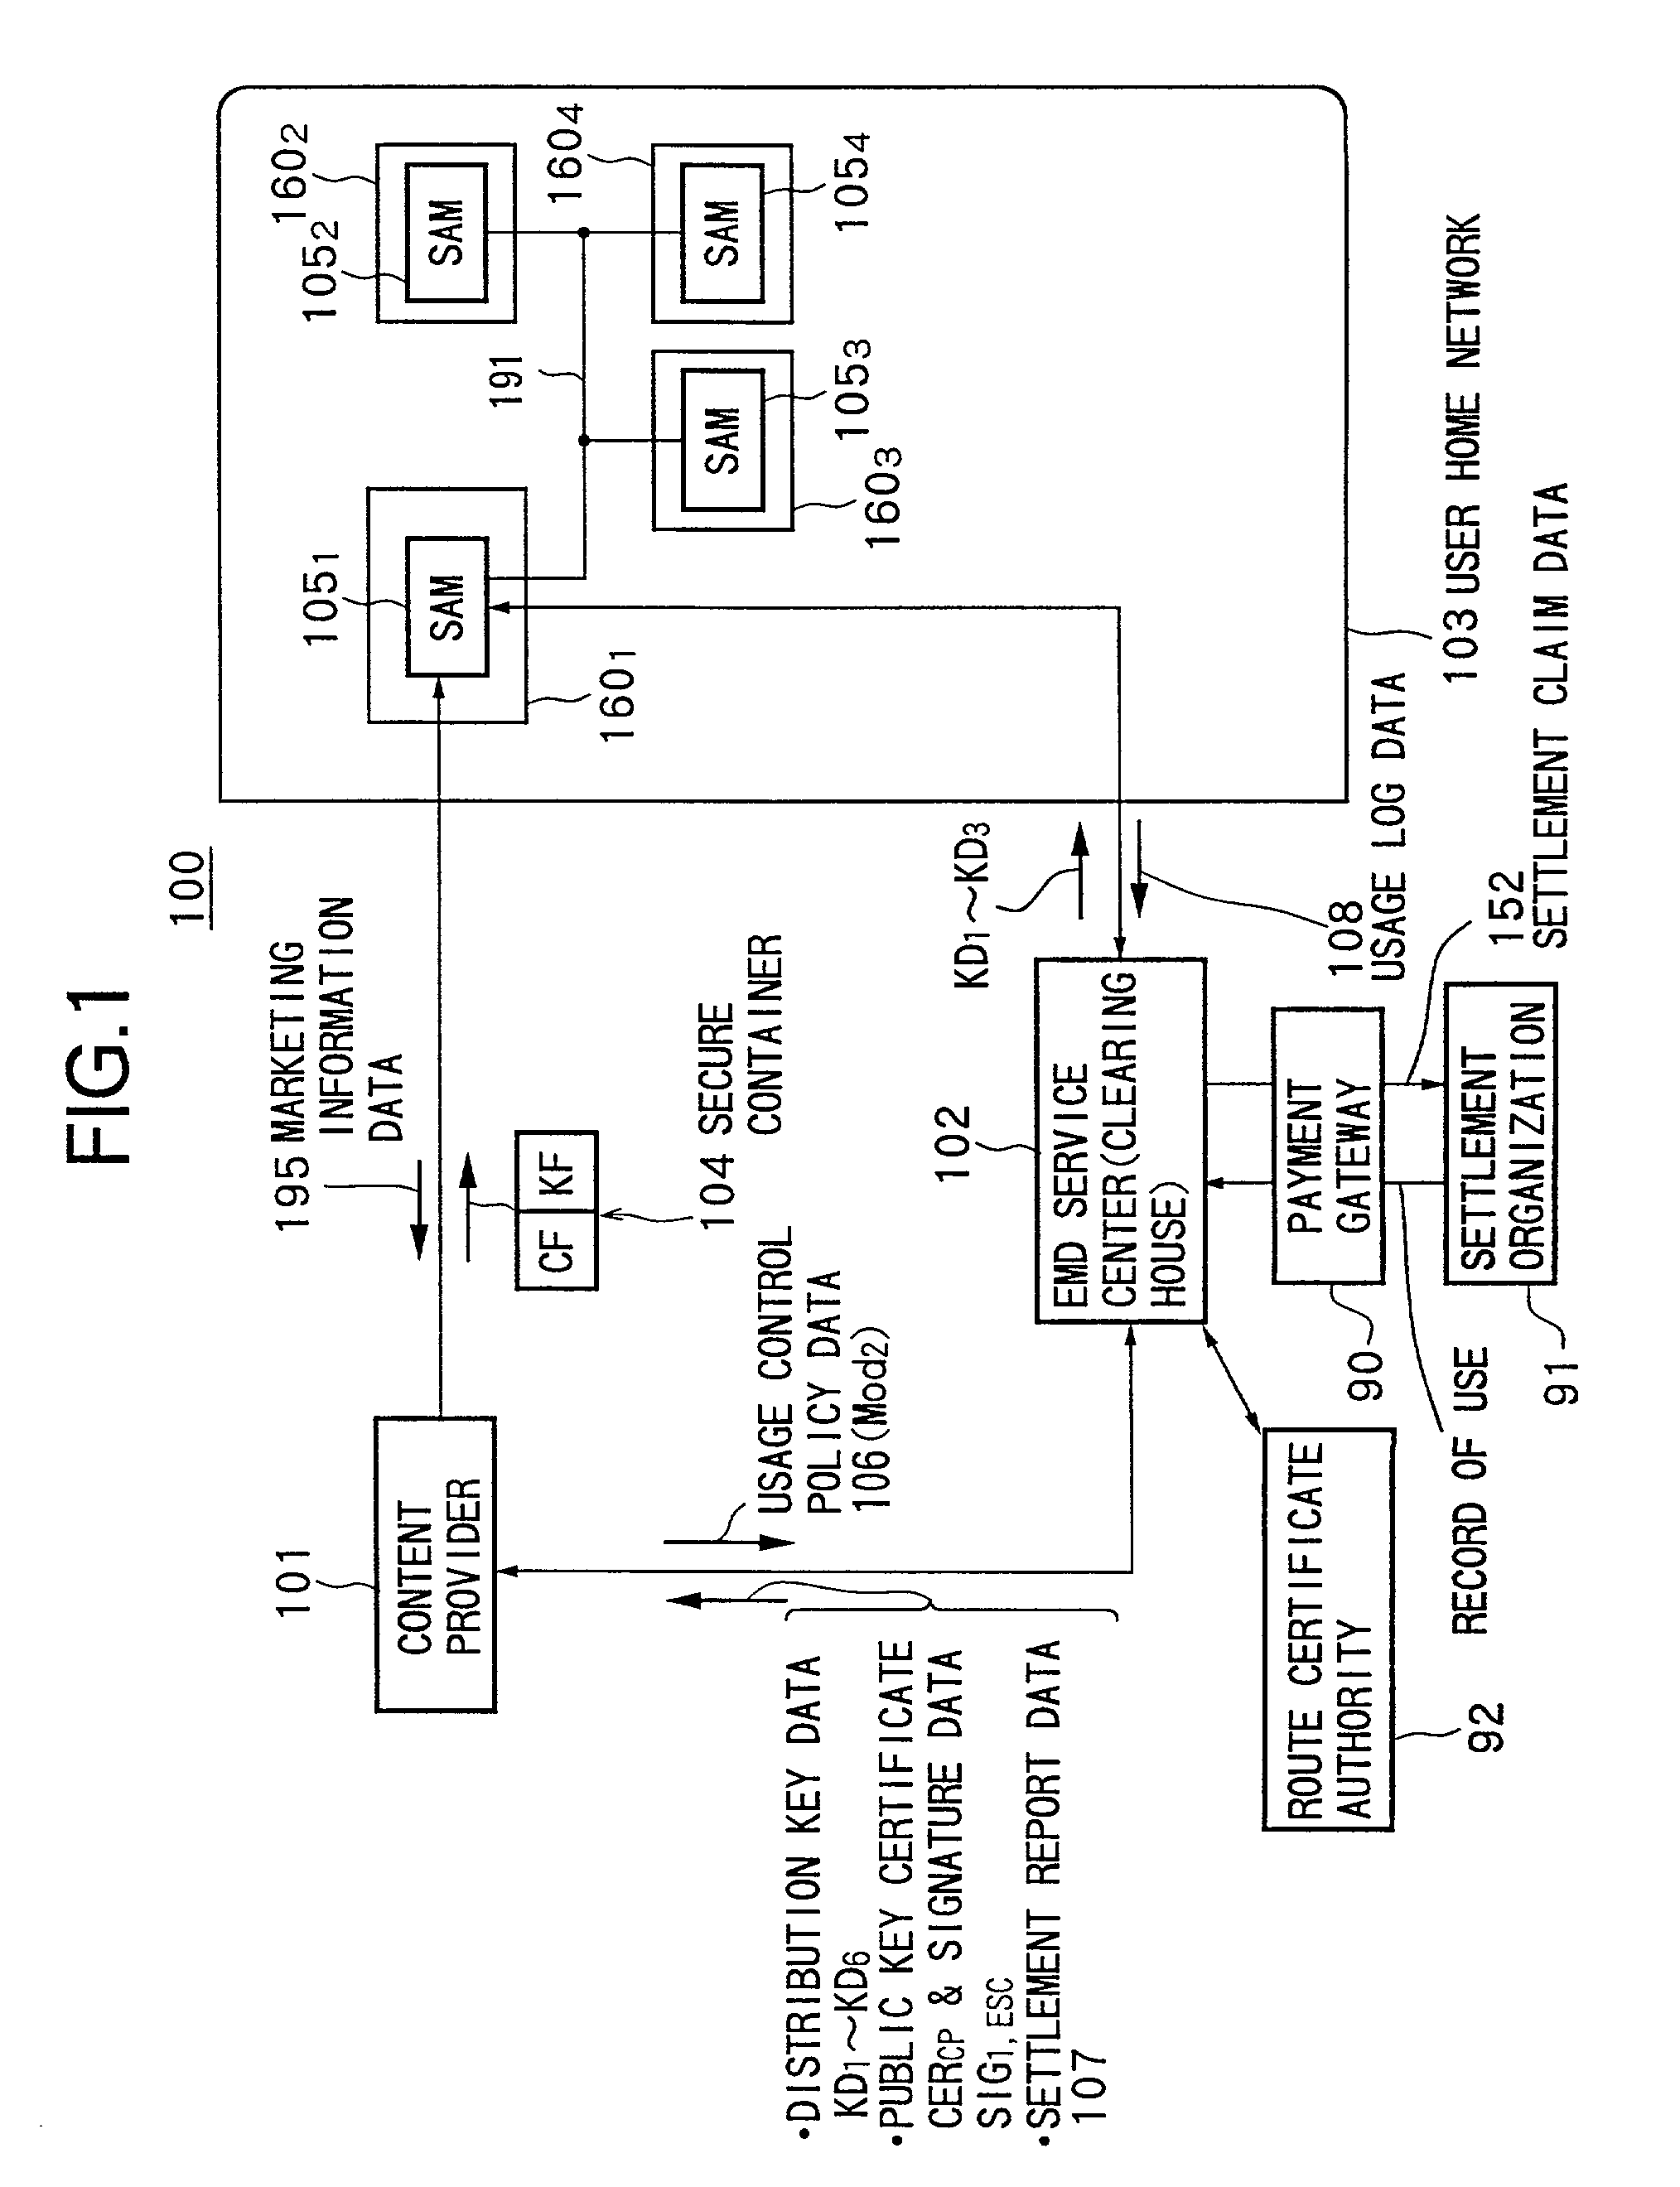 Data providing system, device, and method